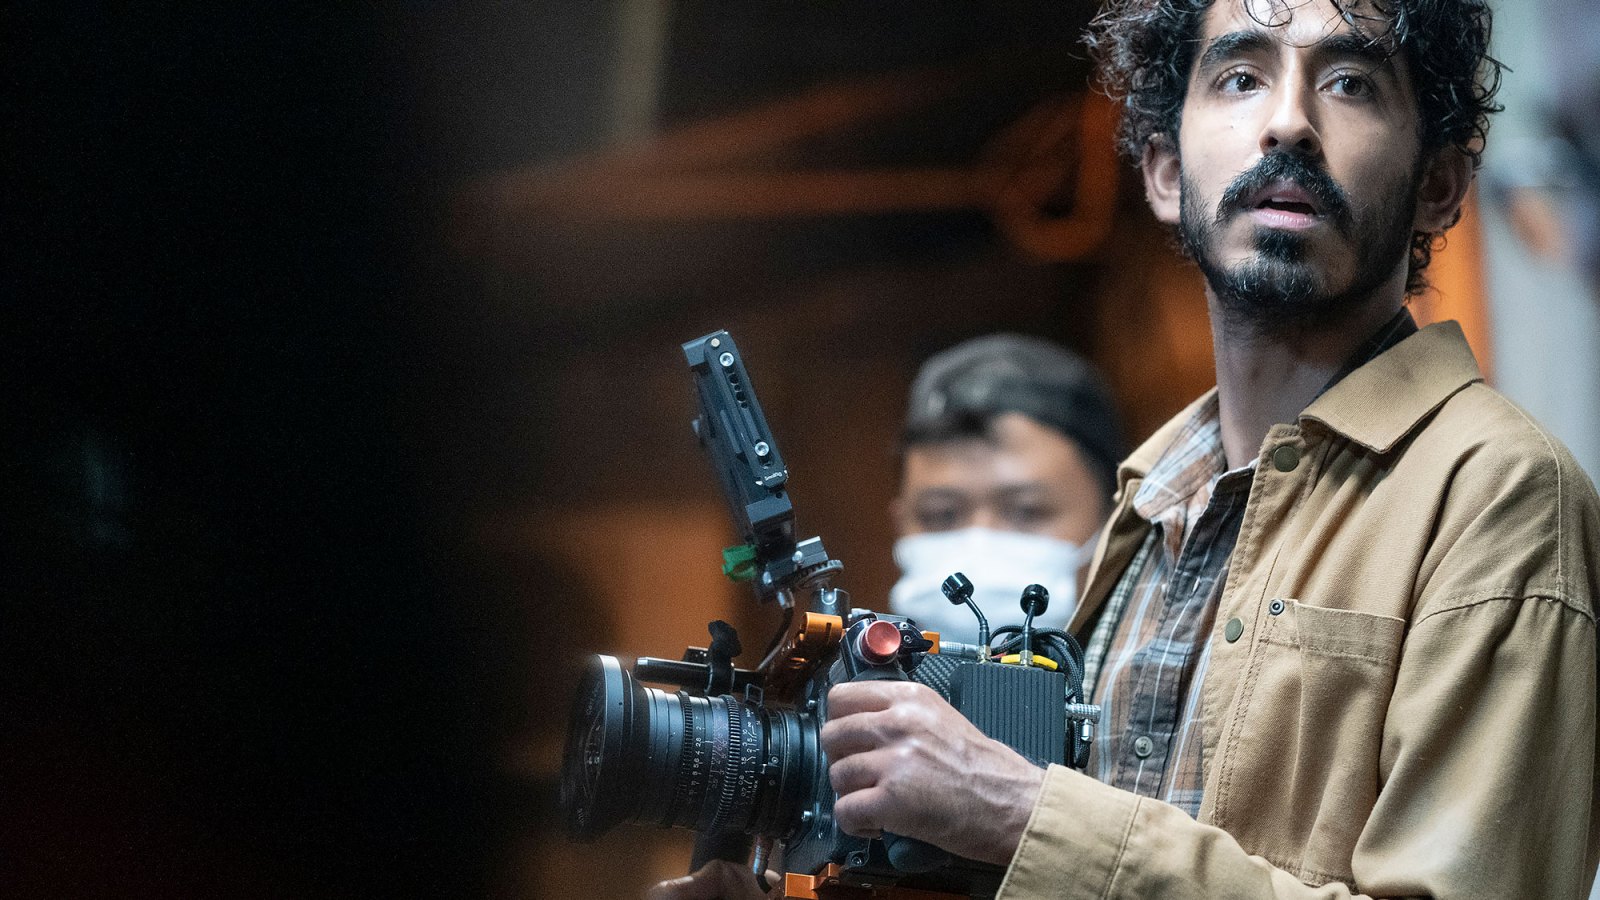 Breaking Down Dev Patel Difficult Journey to Get Monkey Man Made 5